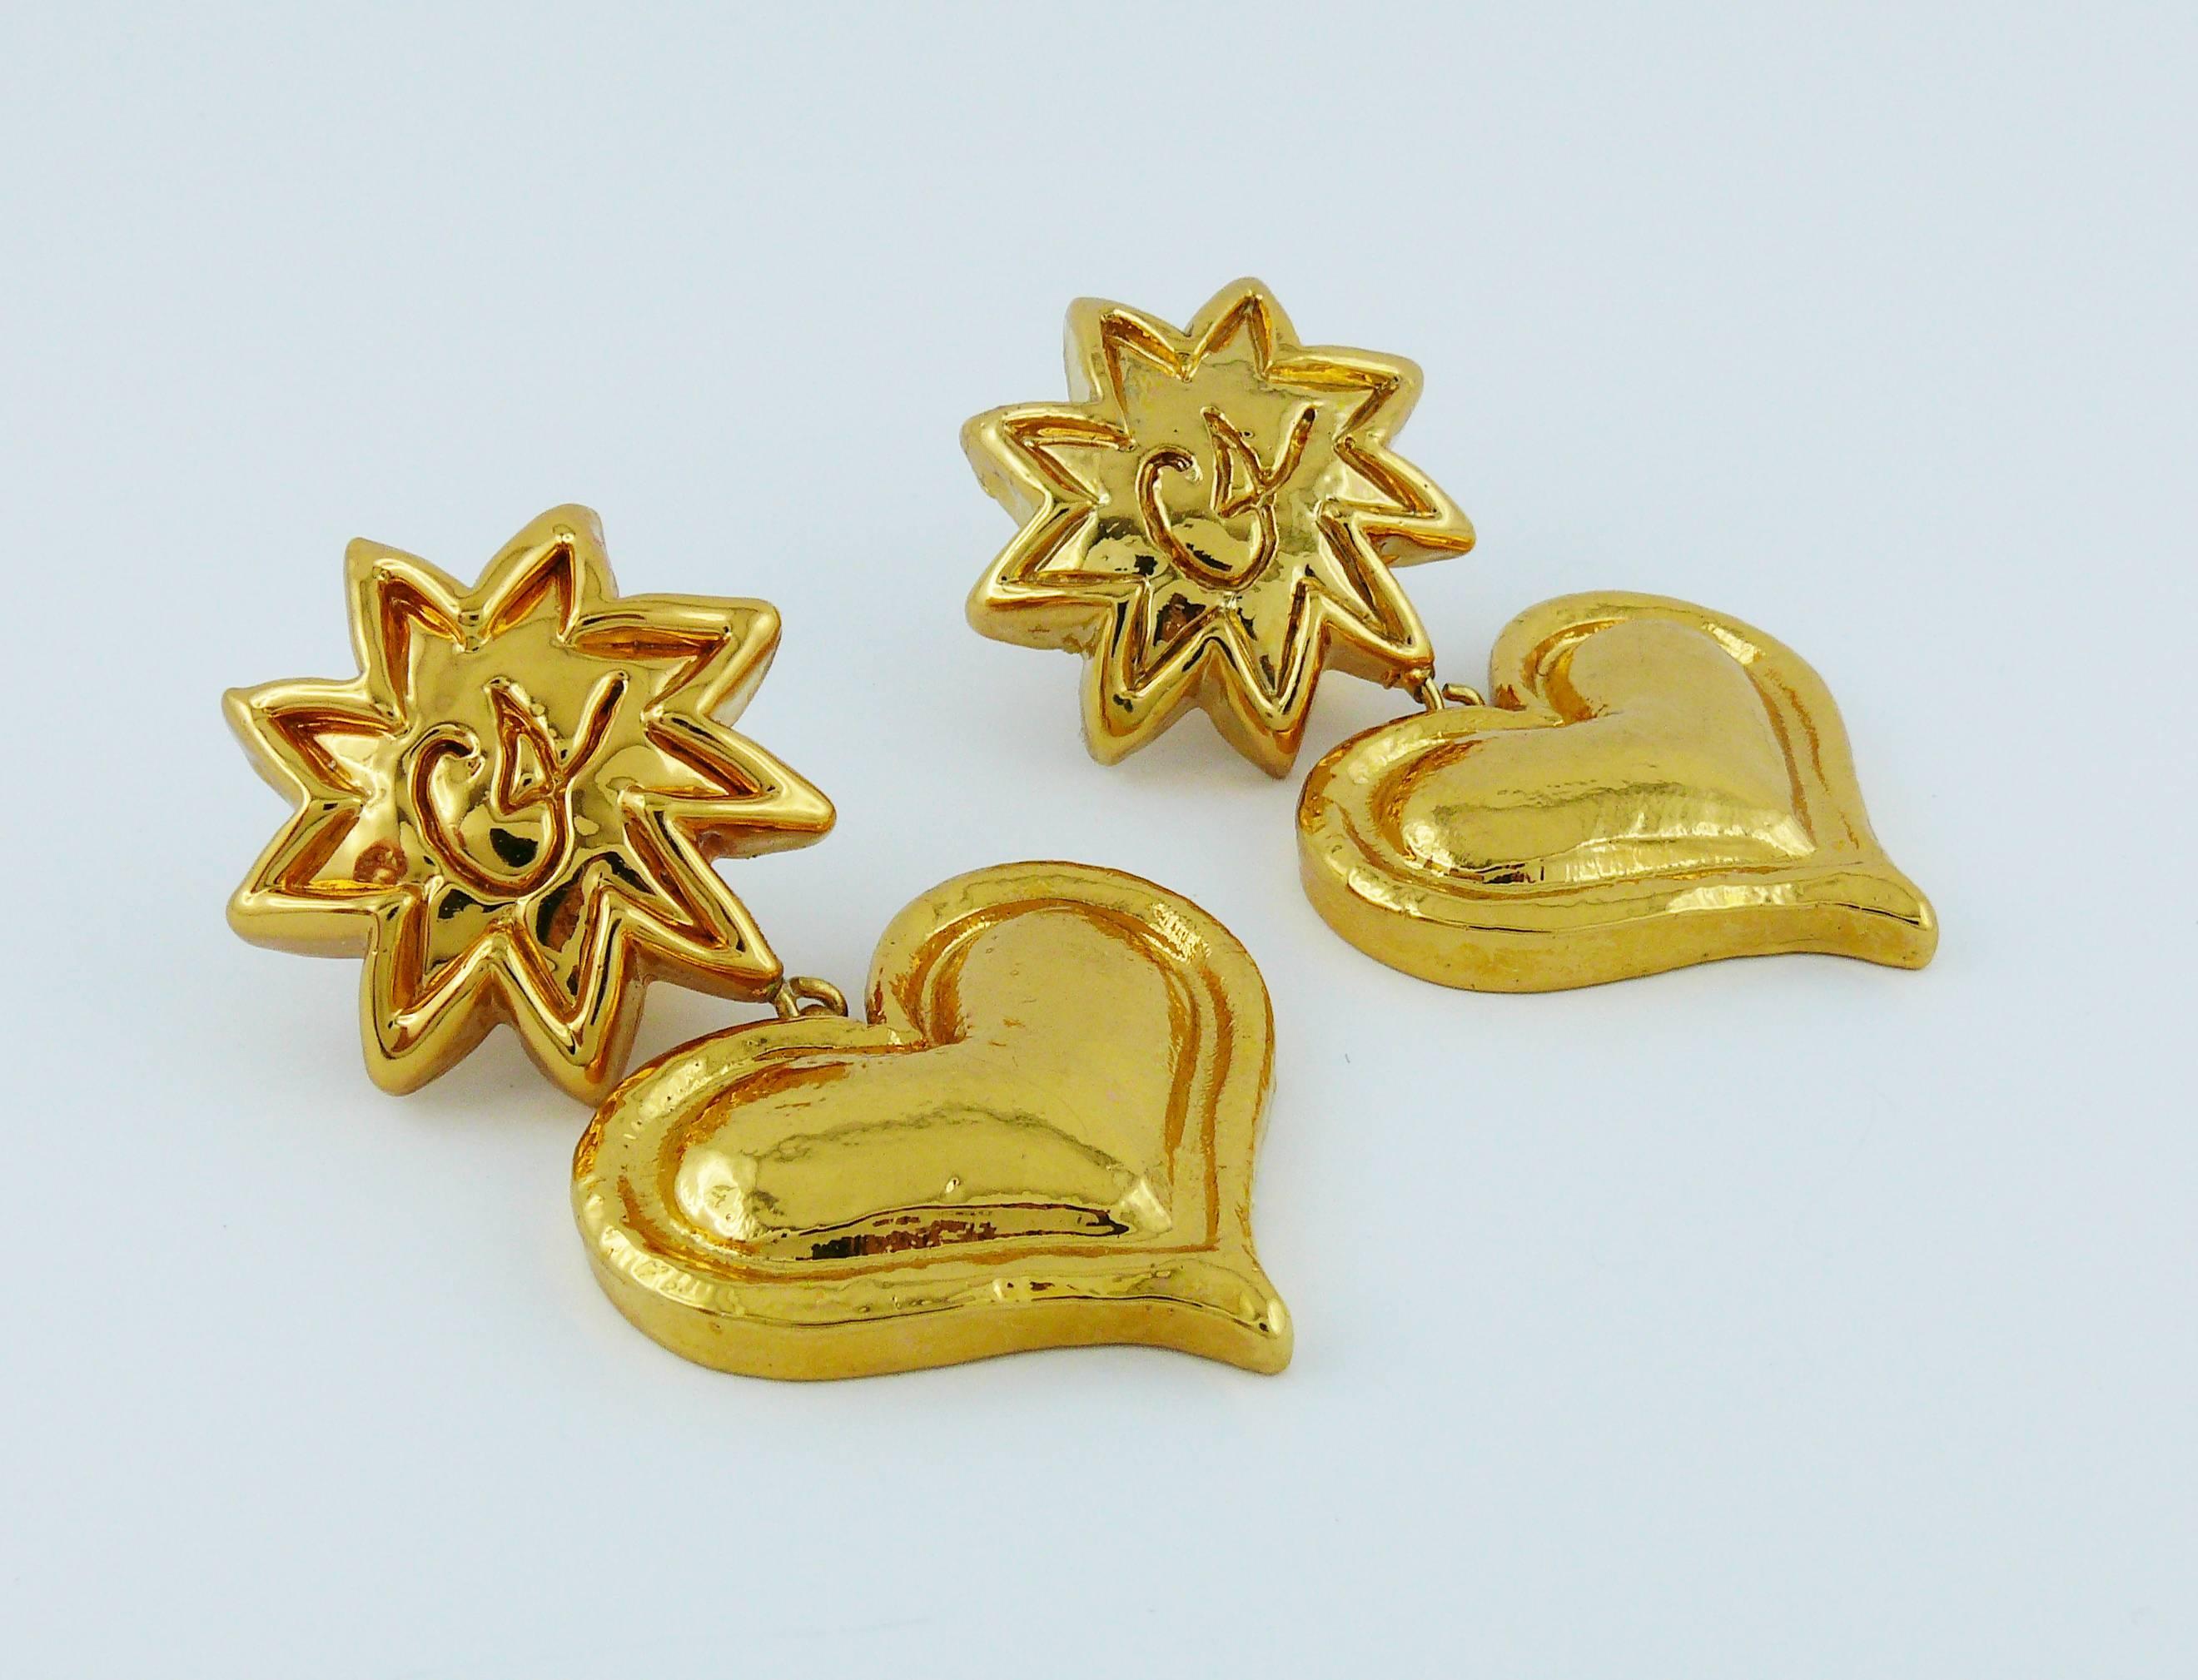 CHRISTIAN LACROIX vintage gold toned resin dangling earrings (clip-on) featuring iconic sun and heart with embossed CHRISTIAN LACROIX monogram.

Marked CHRISTIAN LACROIX CL Made in France (only on the reverse of one earring).

Indicative